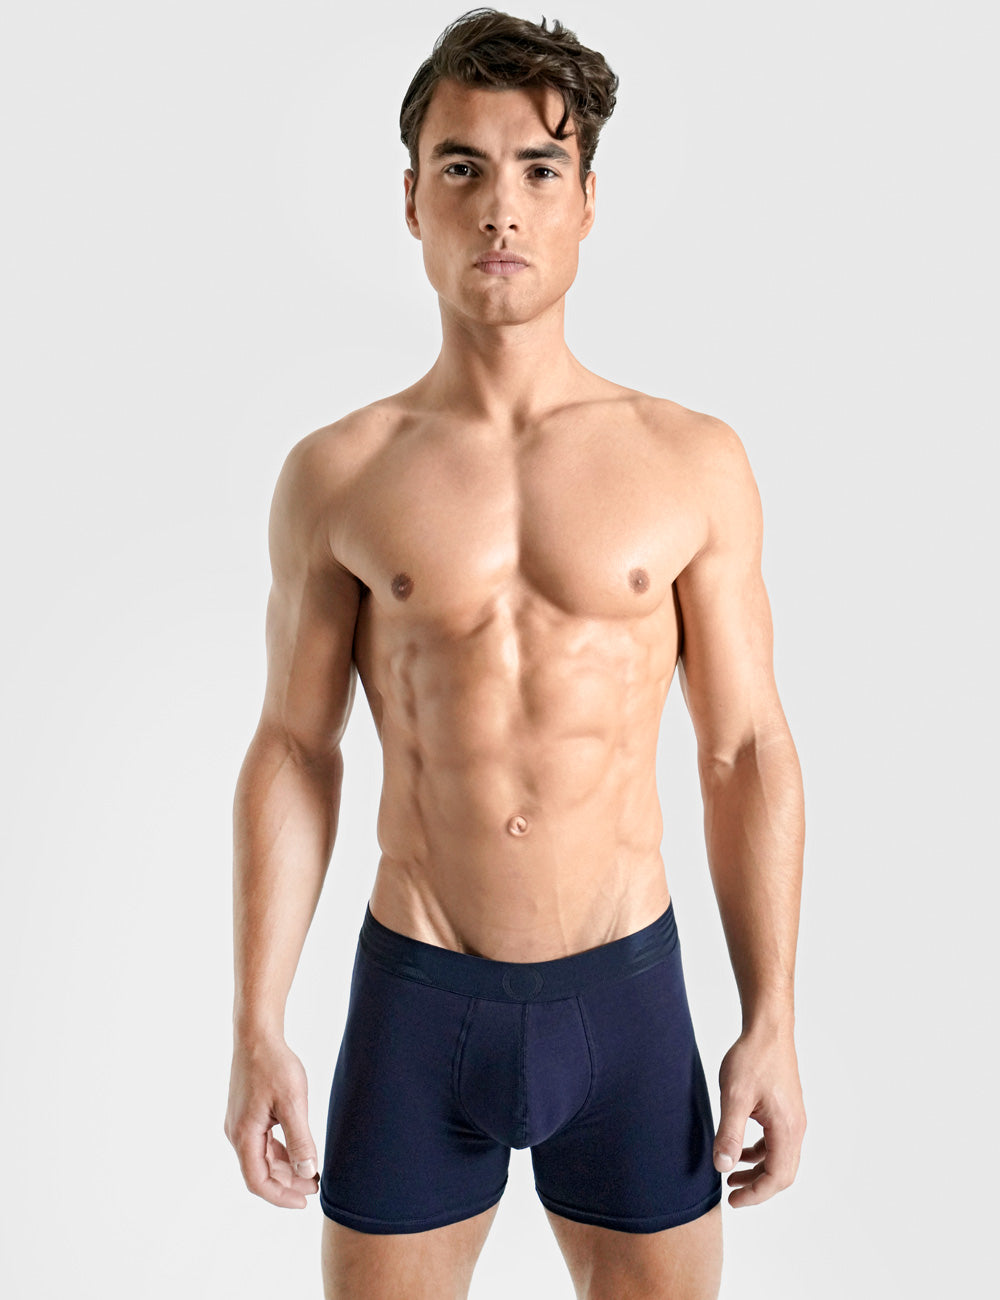 Types of Bulge Enhancing Underwear: Let's Boost Your Confidence